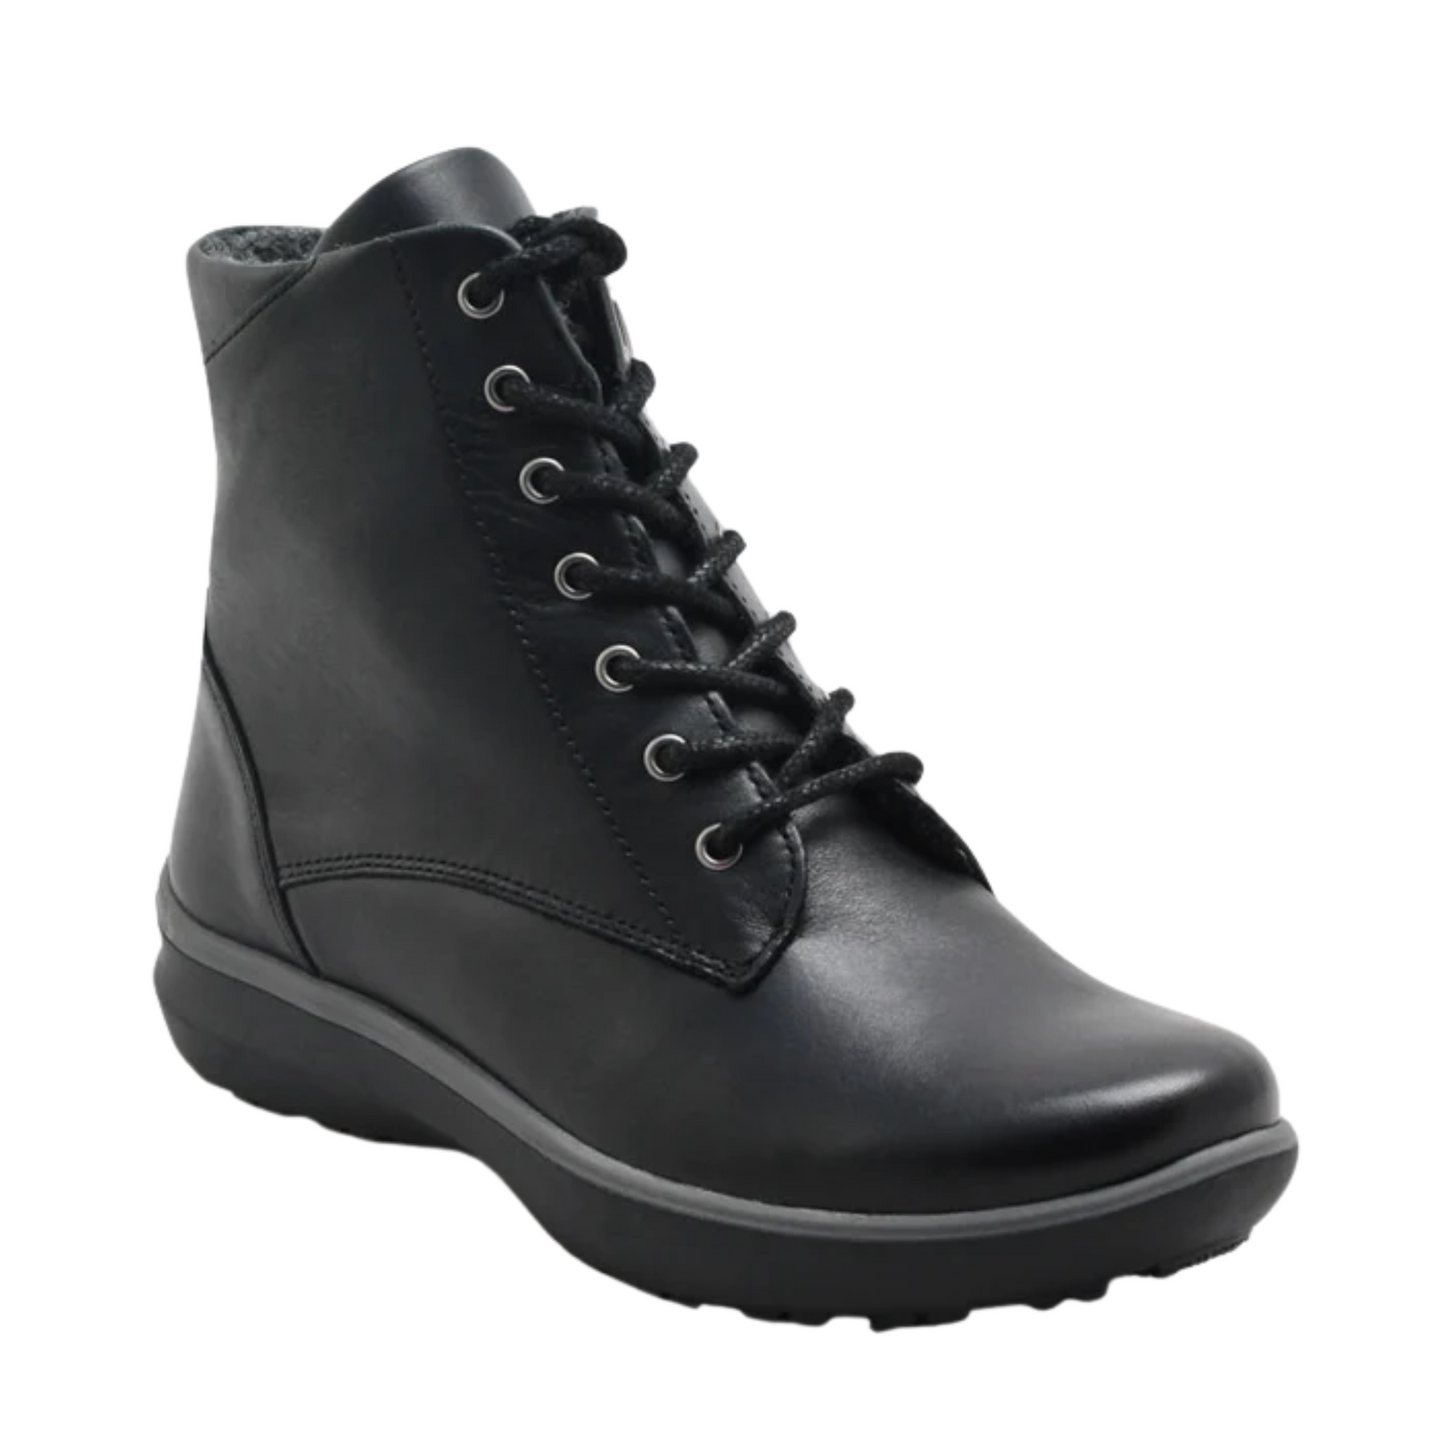 A black lace-up ankle height leather boot is pictured from an angle.